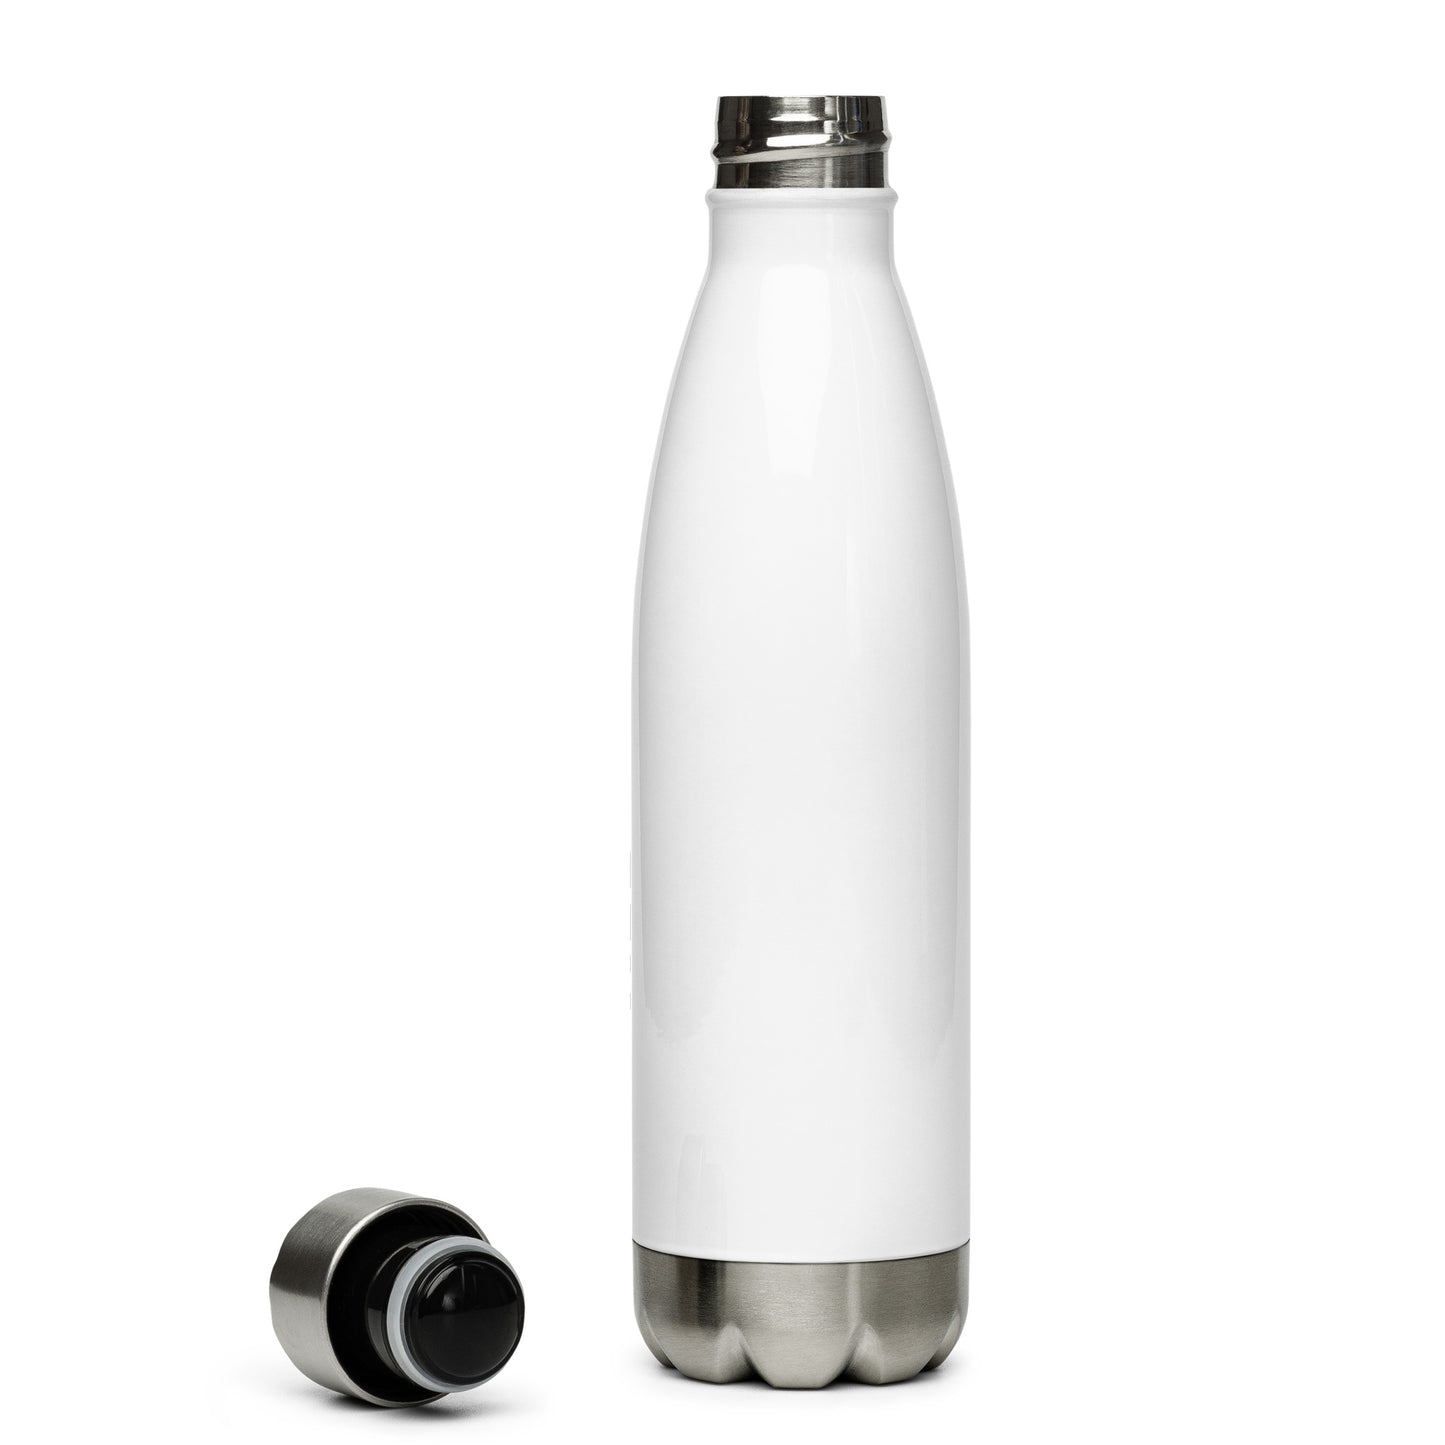 BOO Stainless Steel Water Bottle